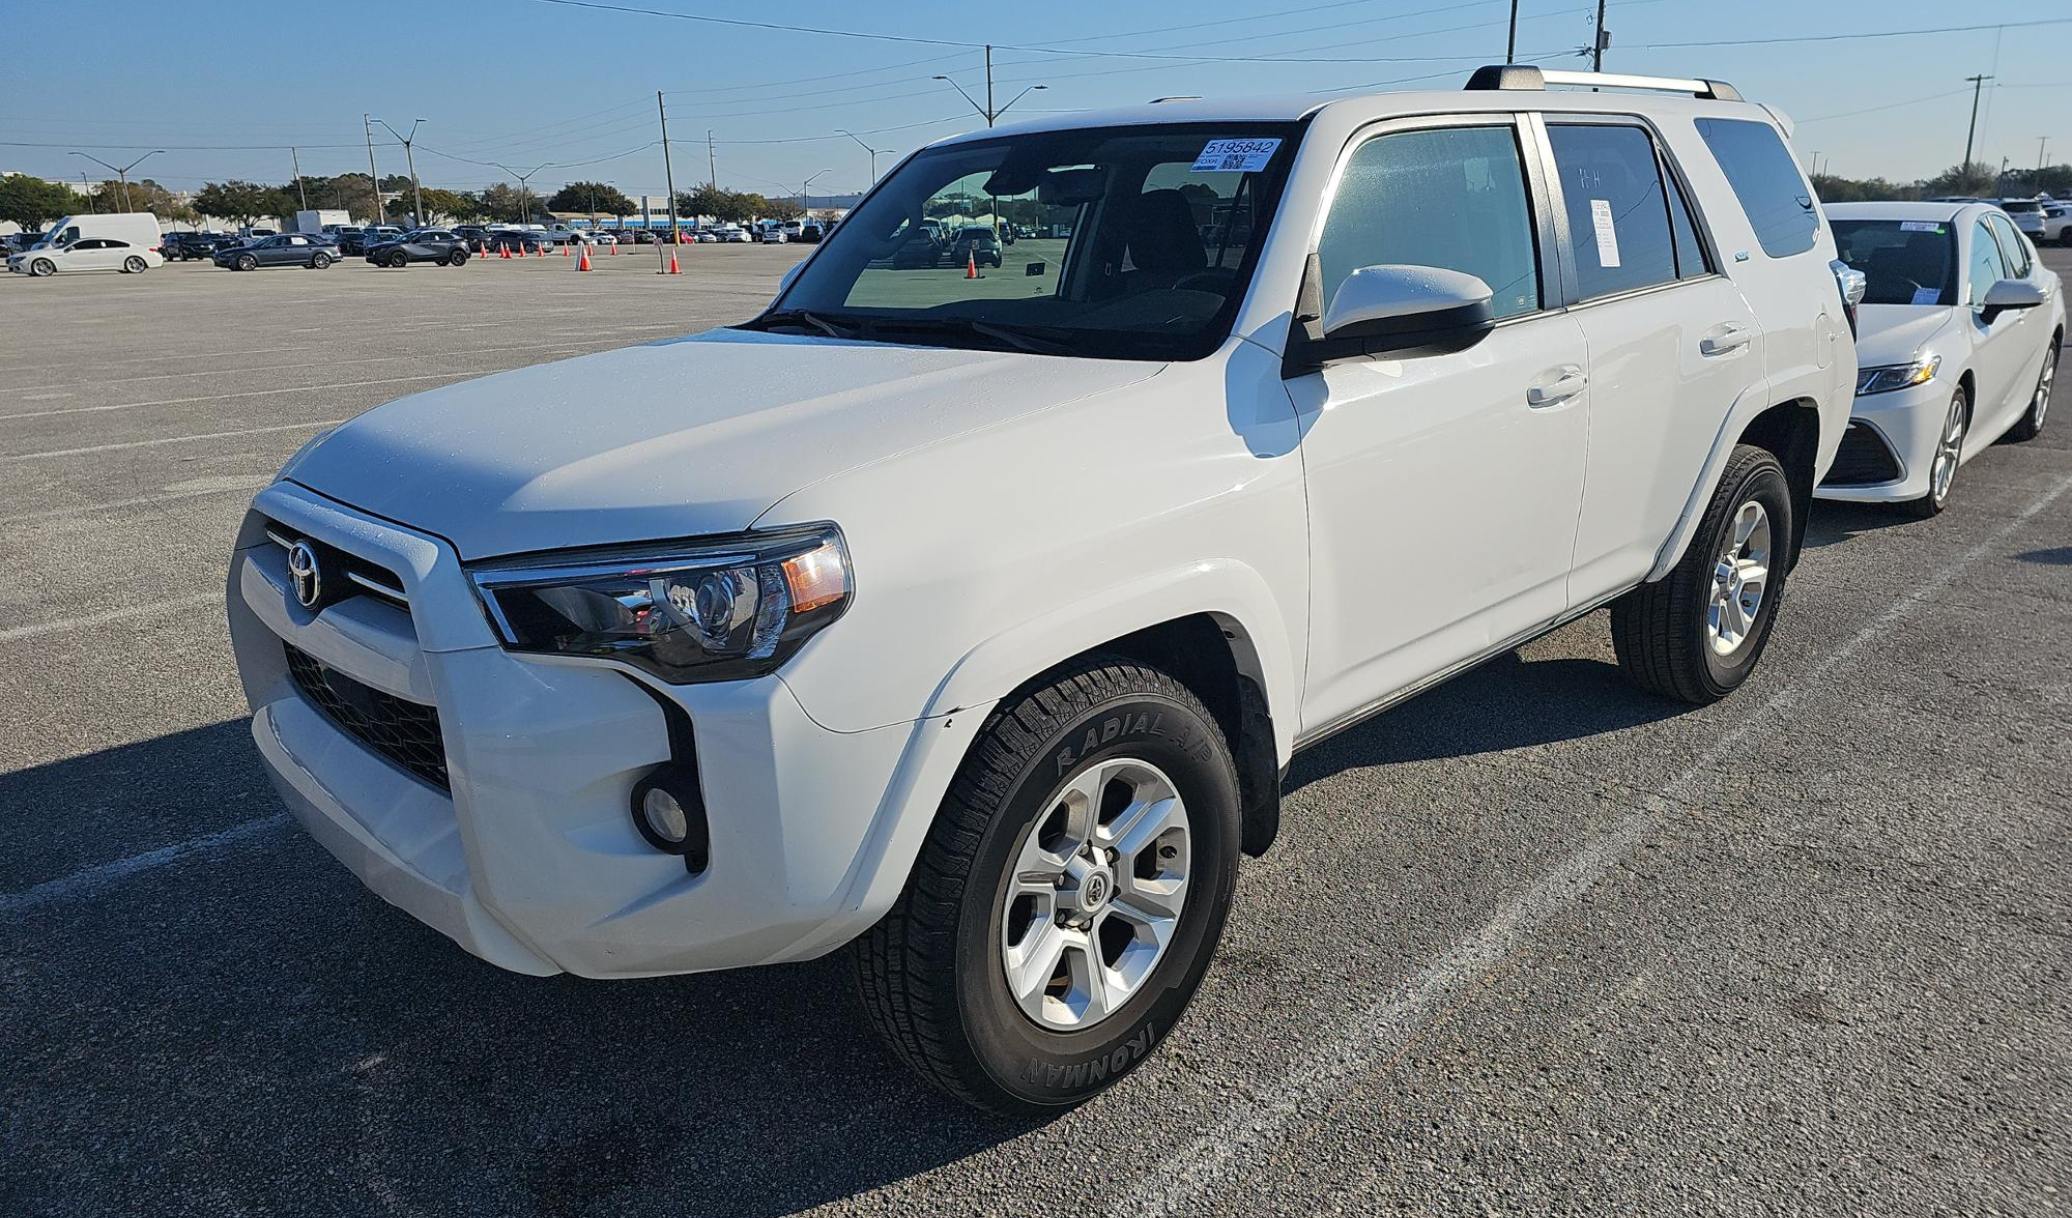 2020 Toyota 4Runner for sale in Gainesville FL 32609 by Veneauto Cars